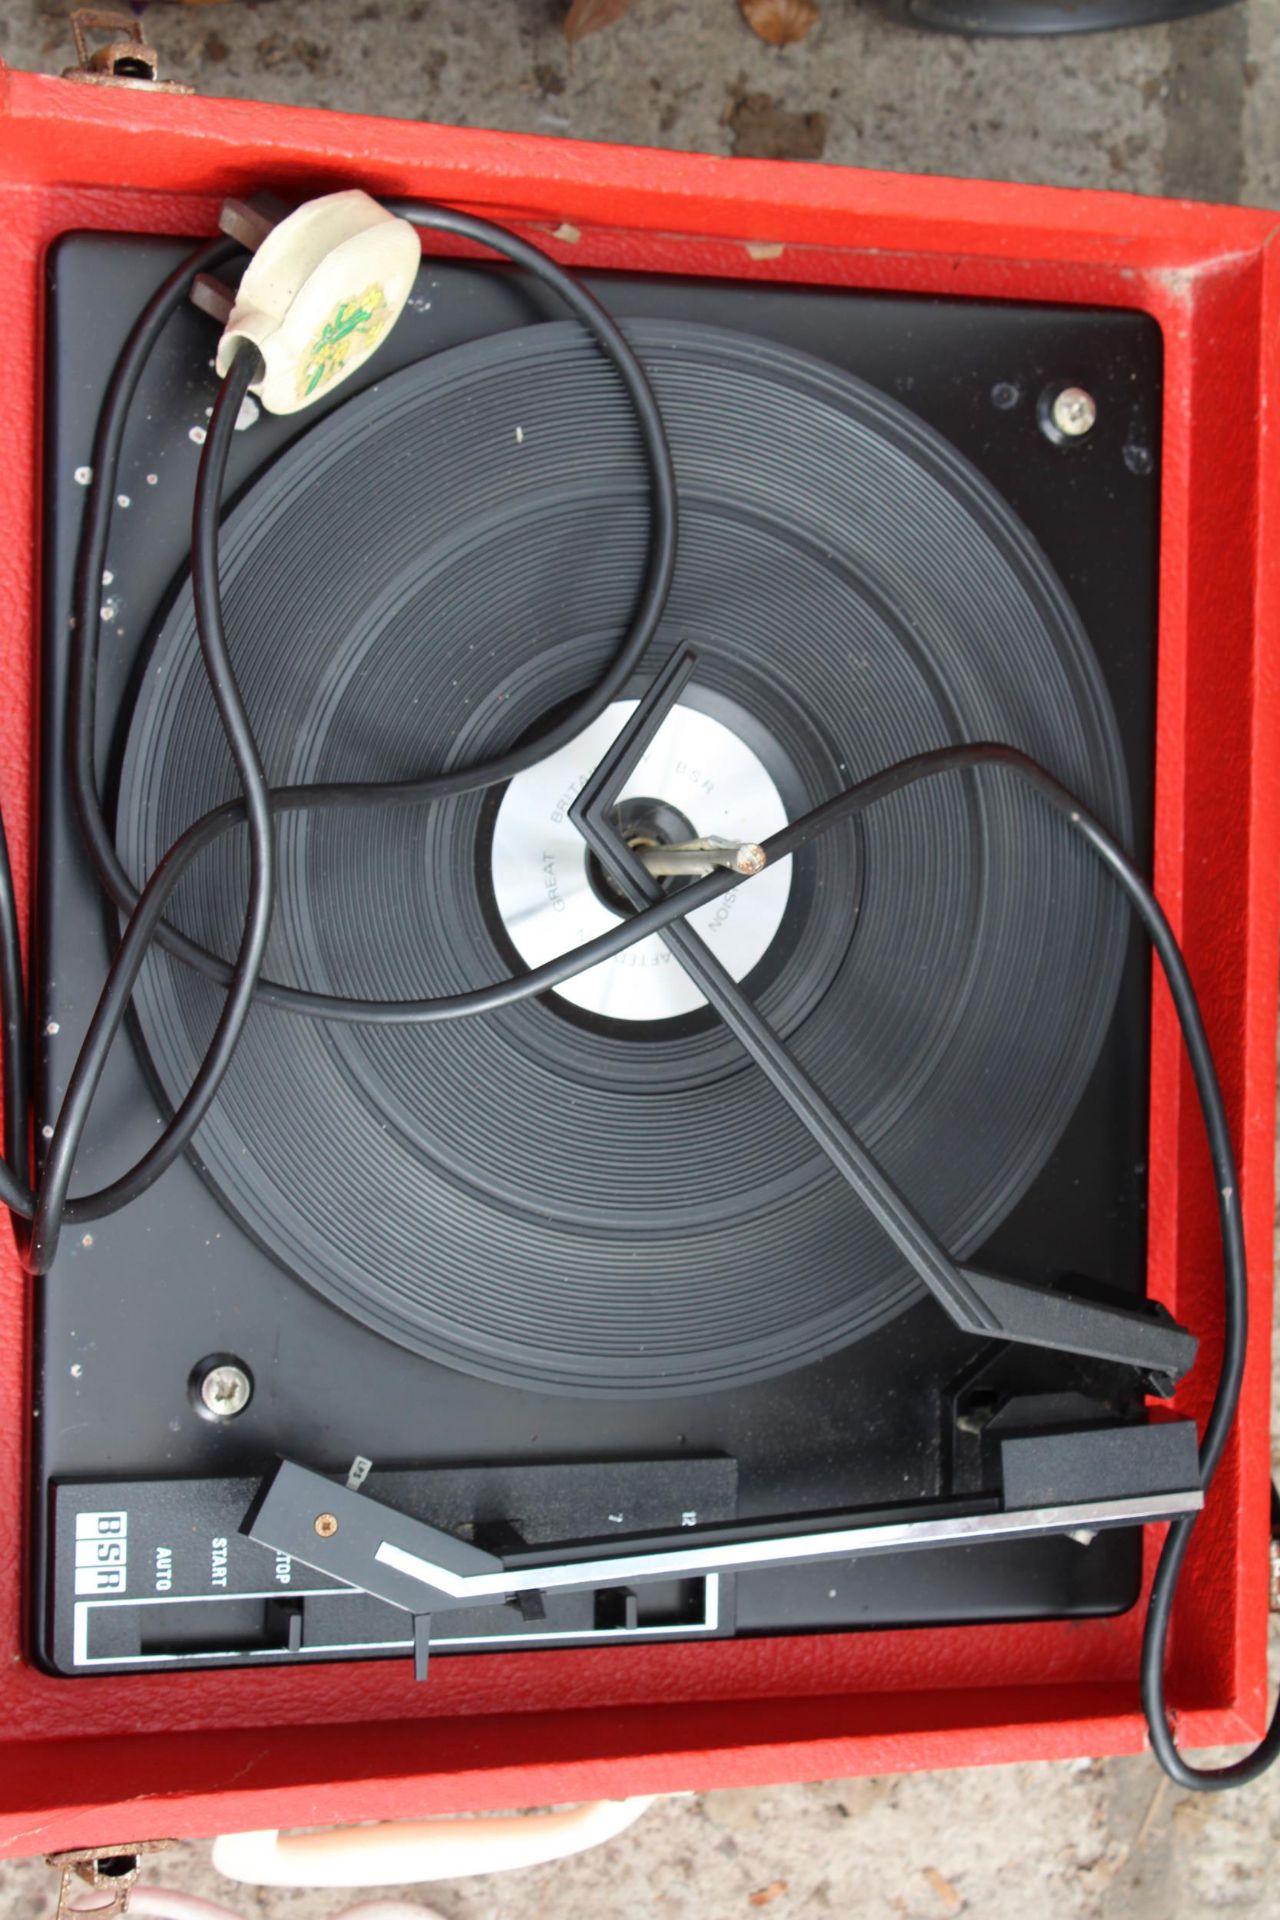 A FIDELITY RECORD PLAYER - Image 2 of 2